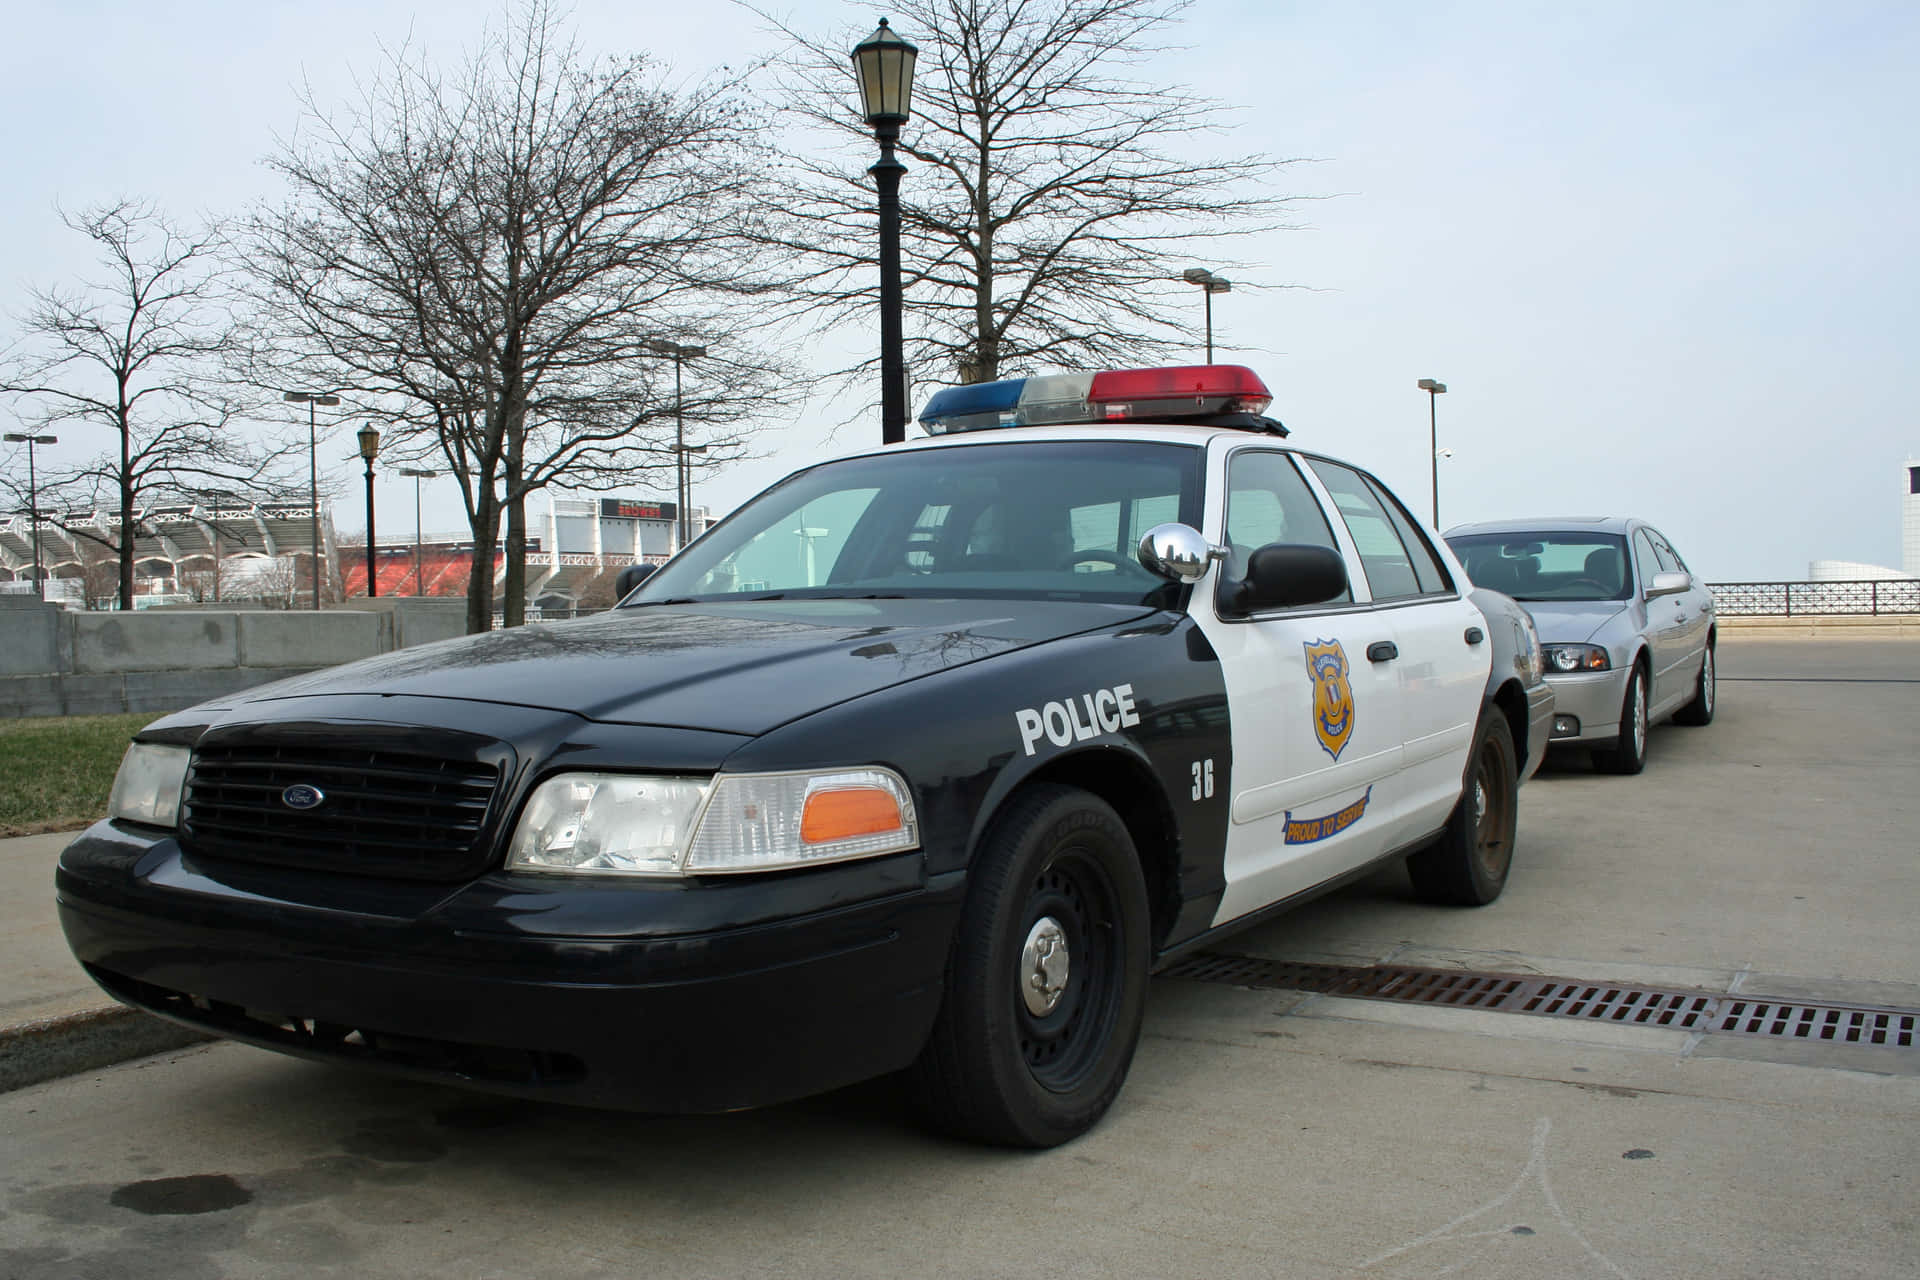 A police car patrolling the streets.